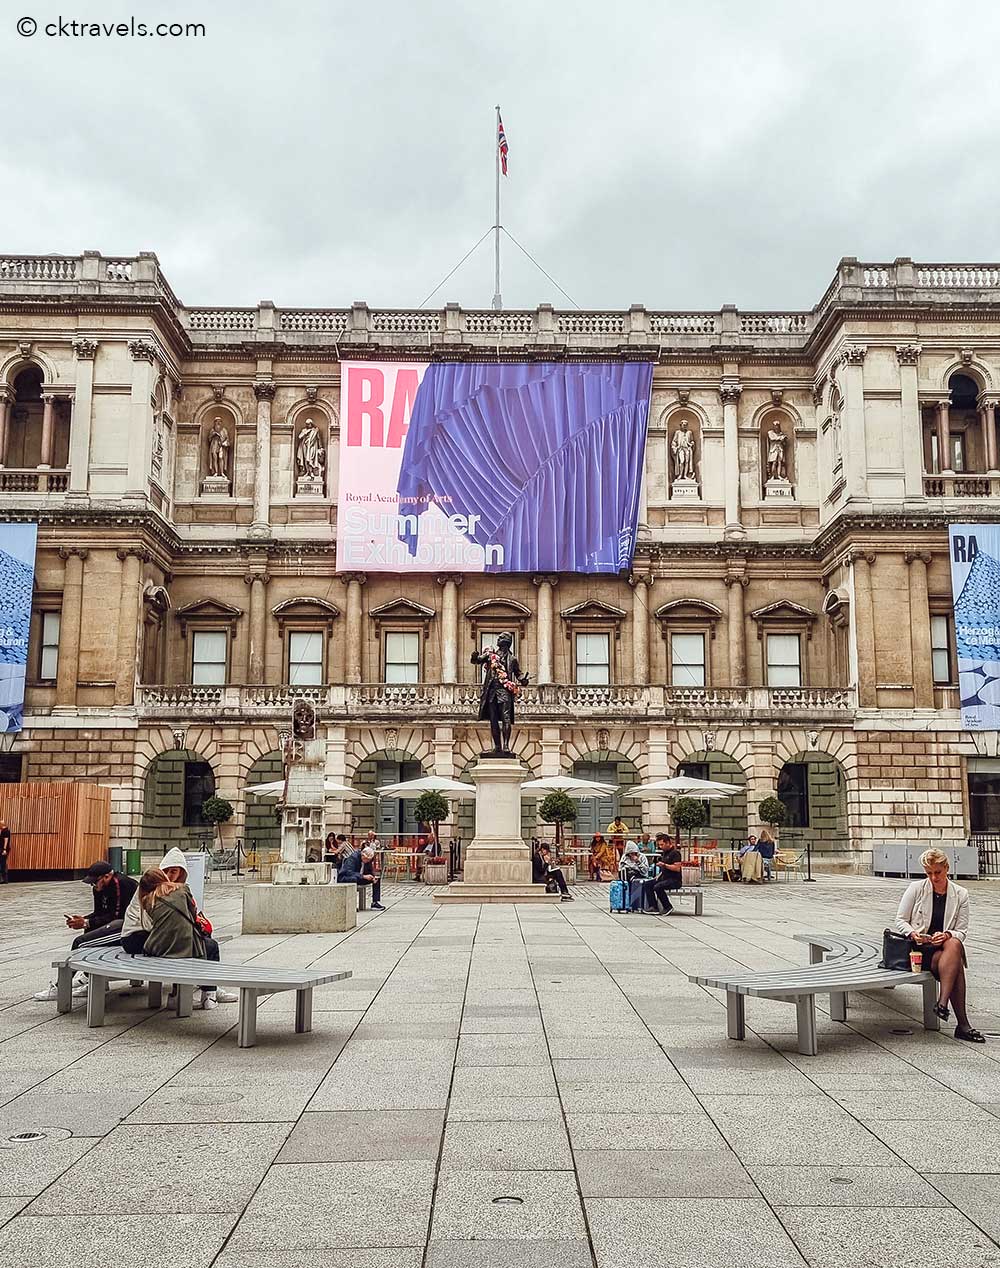 The Royal Academy of Arts near Piccadilly Circus station in London